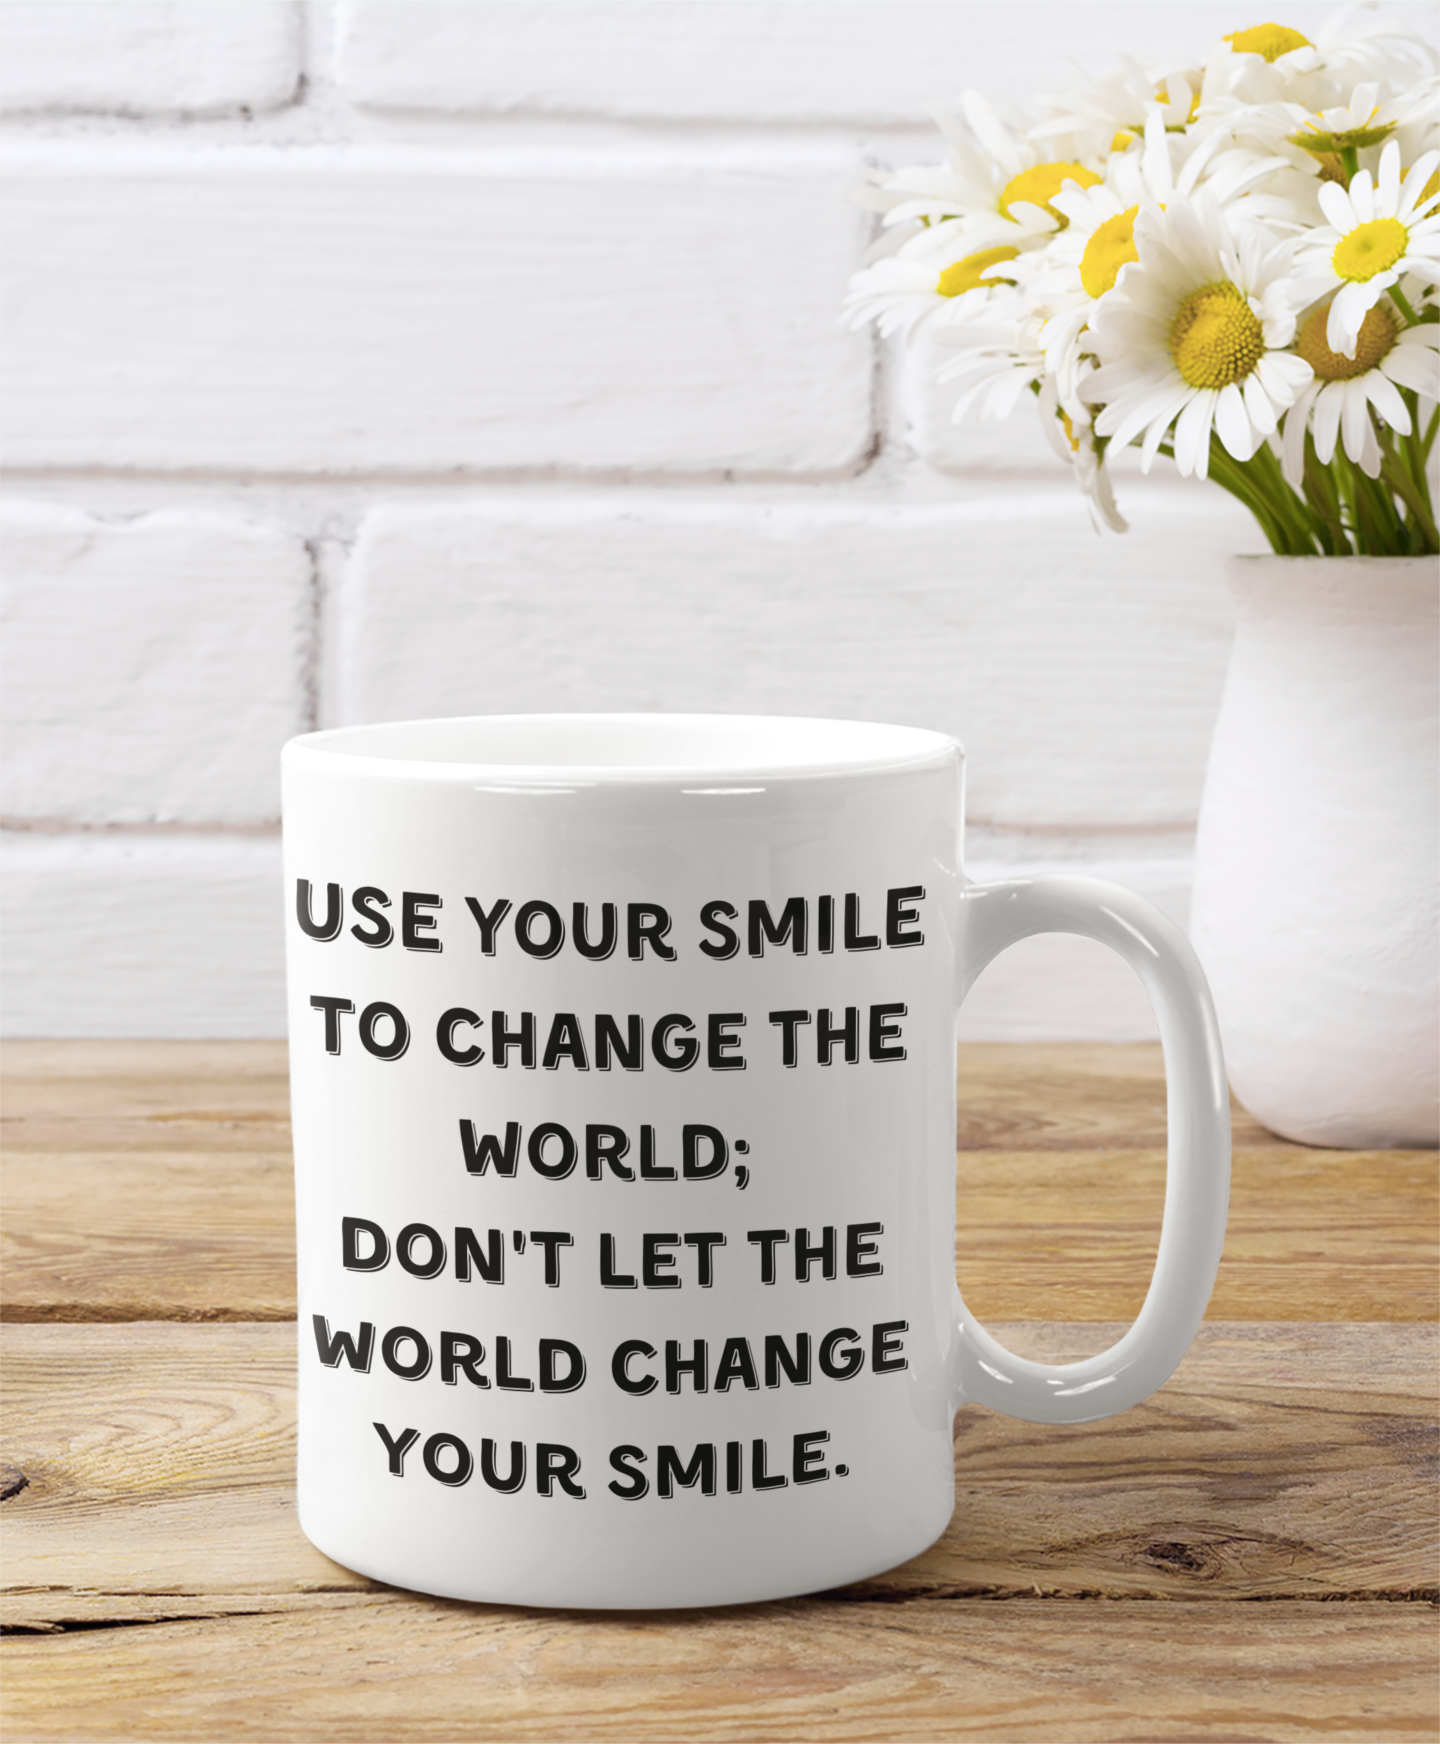 Personalized Ceramic Mugs & Coffee Cups: Best Motivational Gifts For Colleagues